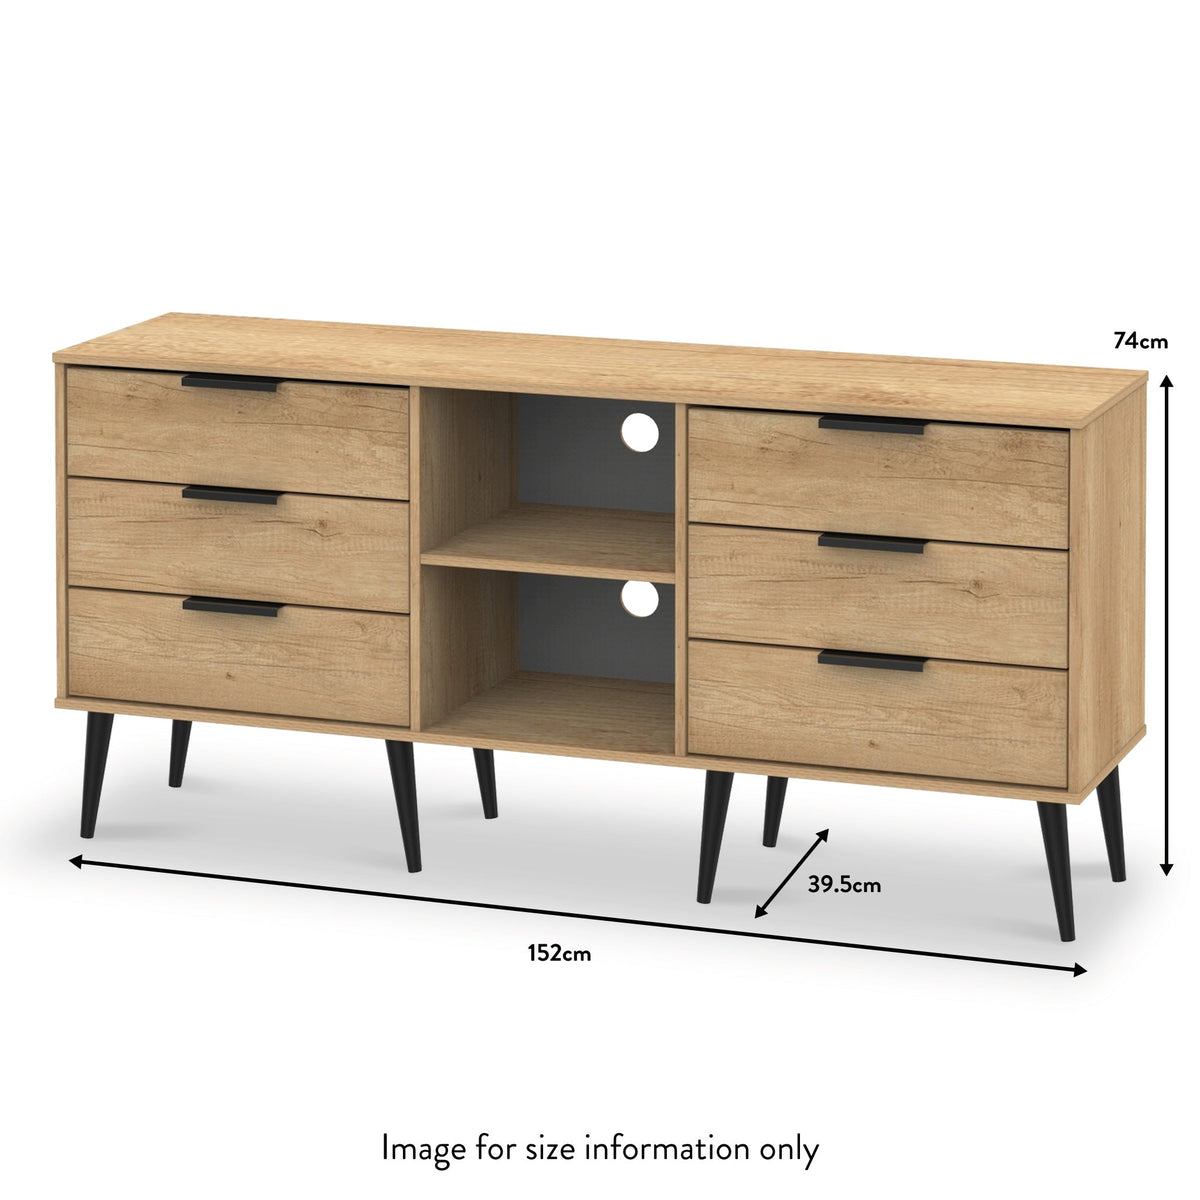 Asher Light 6 Drawer Sideboard Cabinet with black legs dimensions